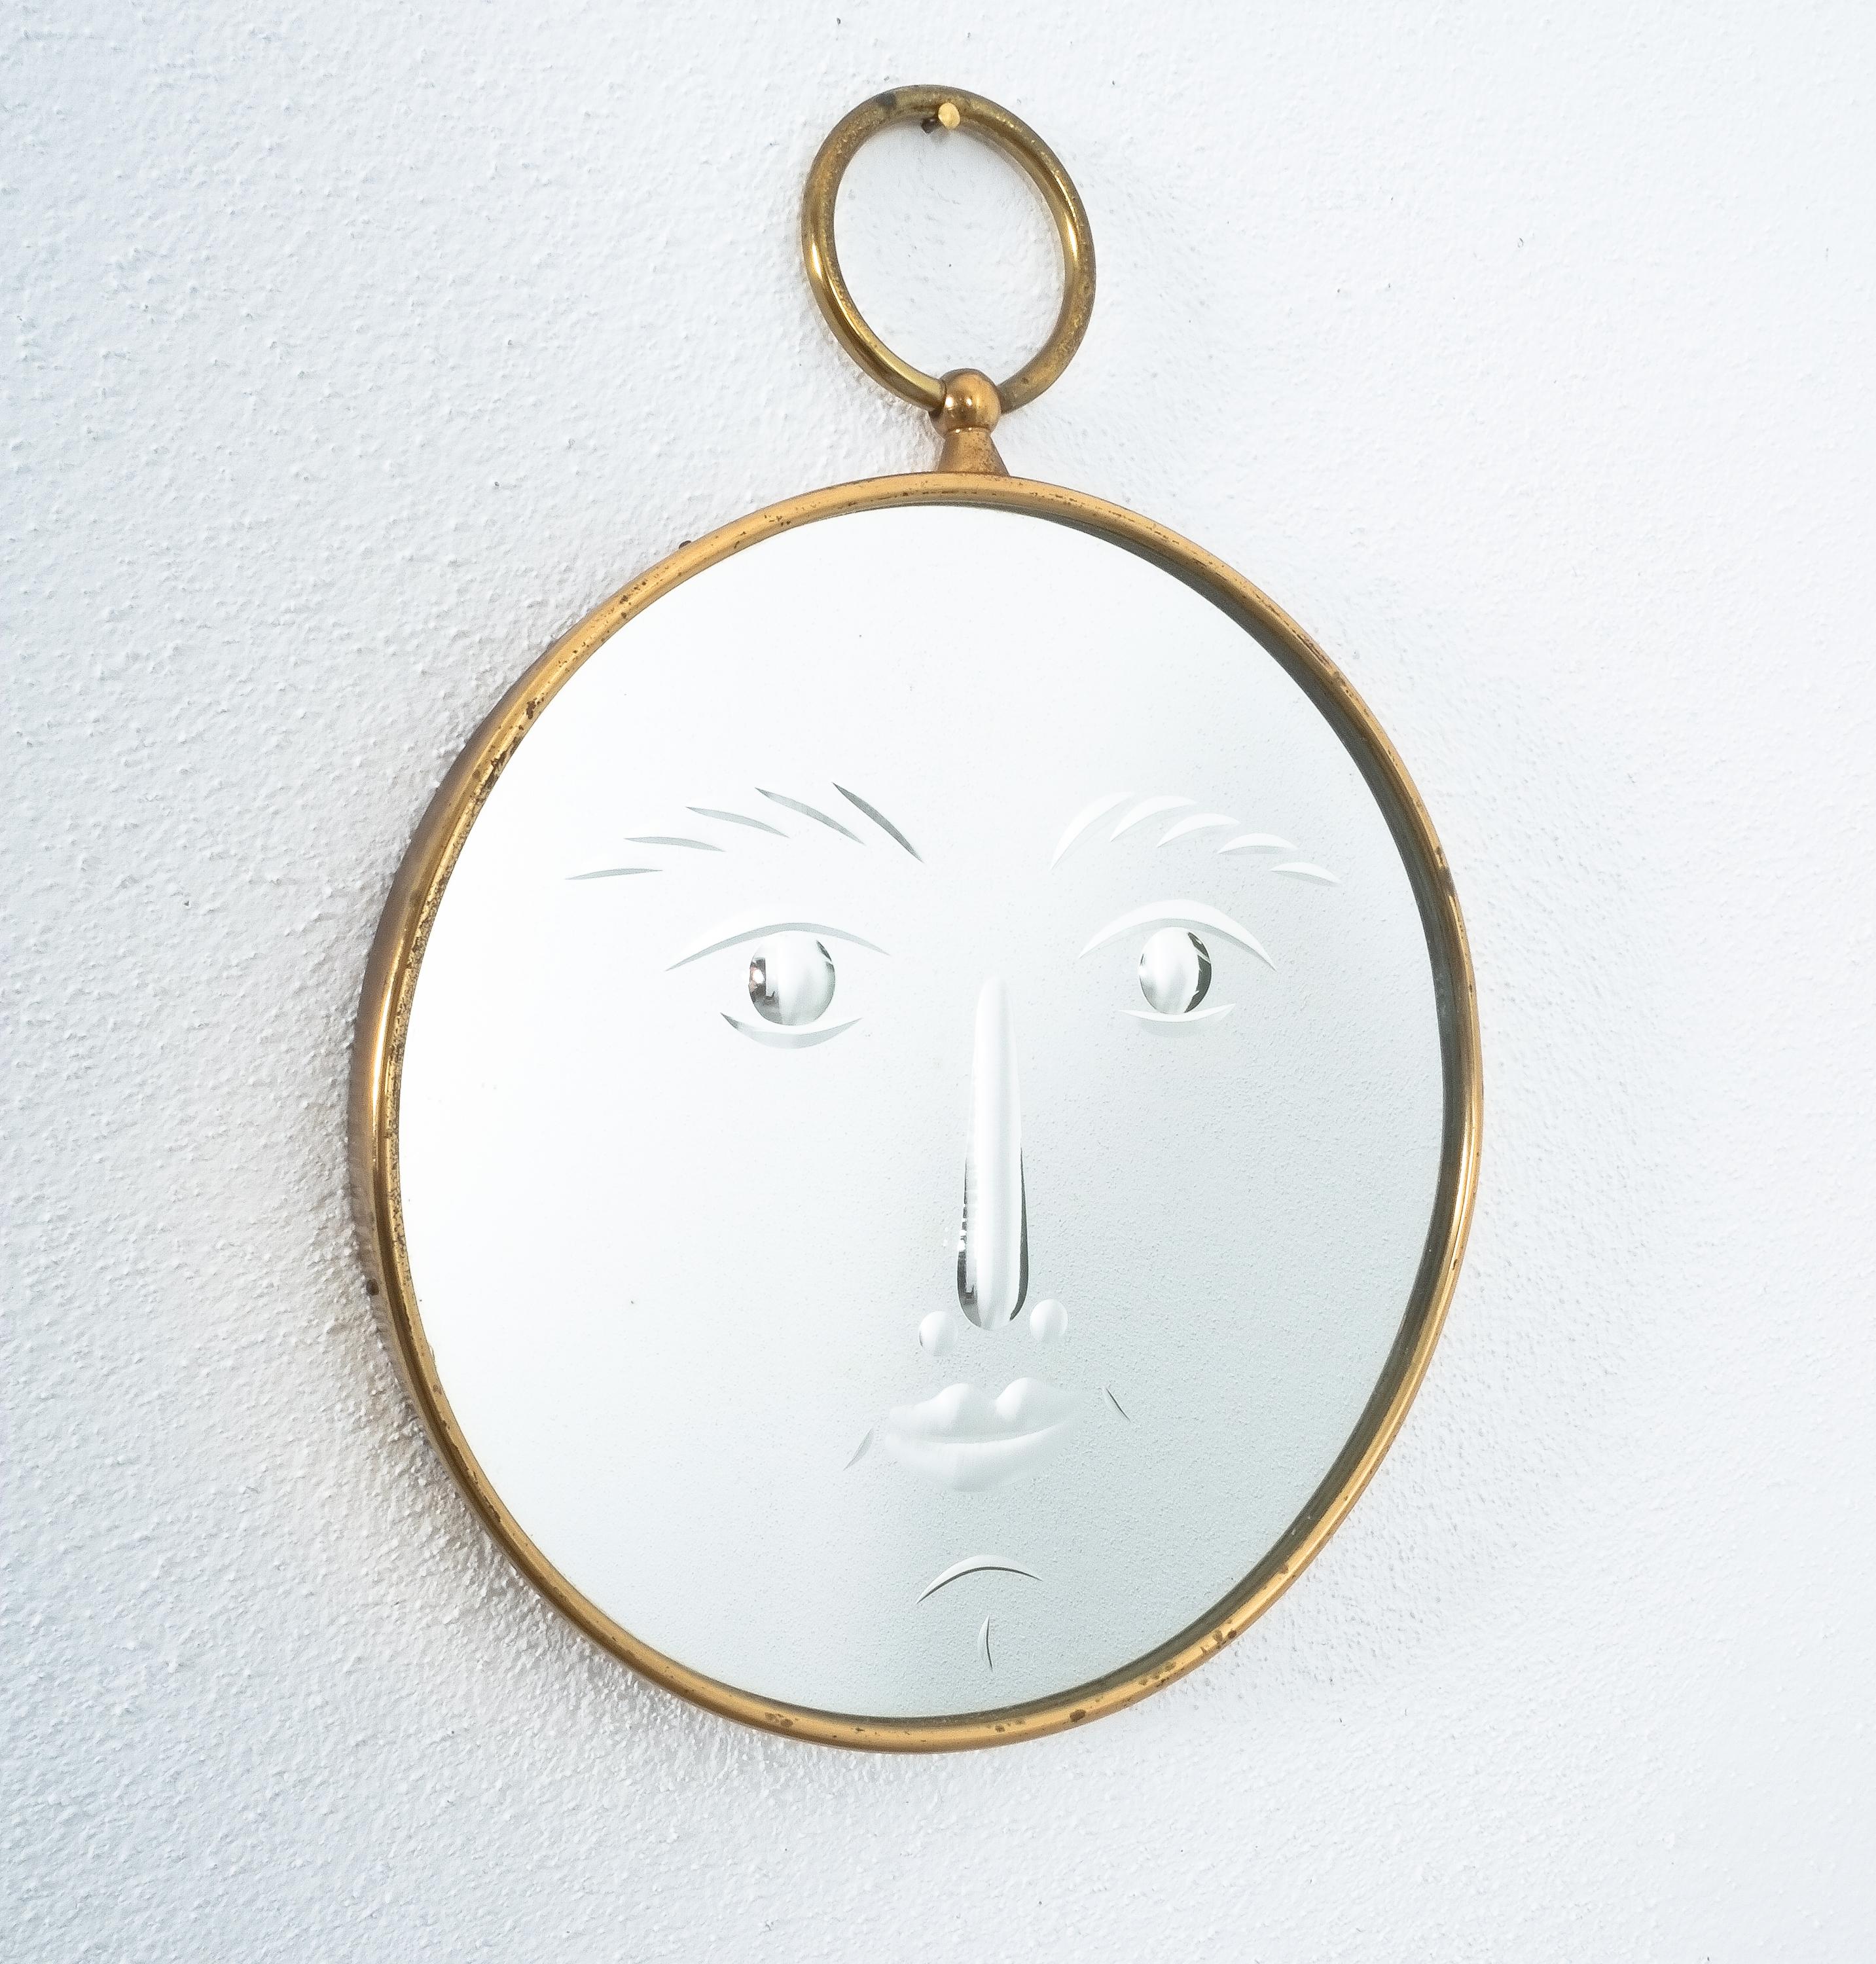 Very rare face mirror by Piero Fornasetti, Italy, from the early 1960.

Slightly smiling, charming mirror by Piero Fornasetti featuring a hand bevelled mirror glass in a brass frame. The mirror is in very good vintage condition. 

Literature: